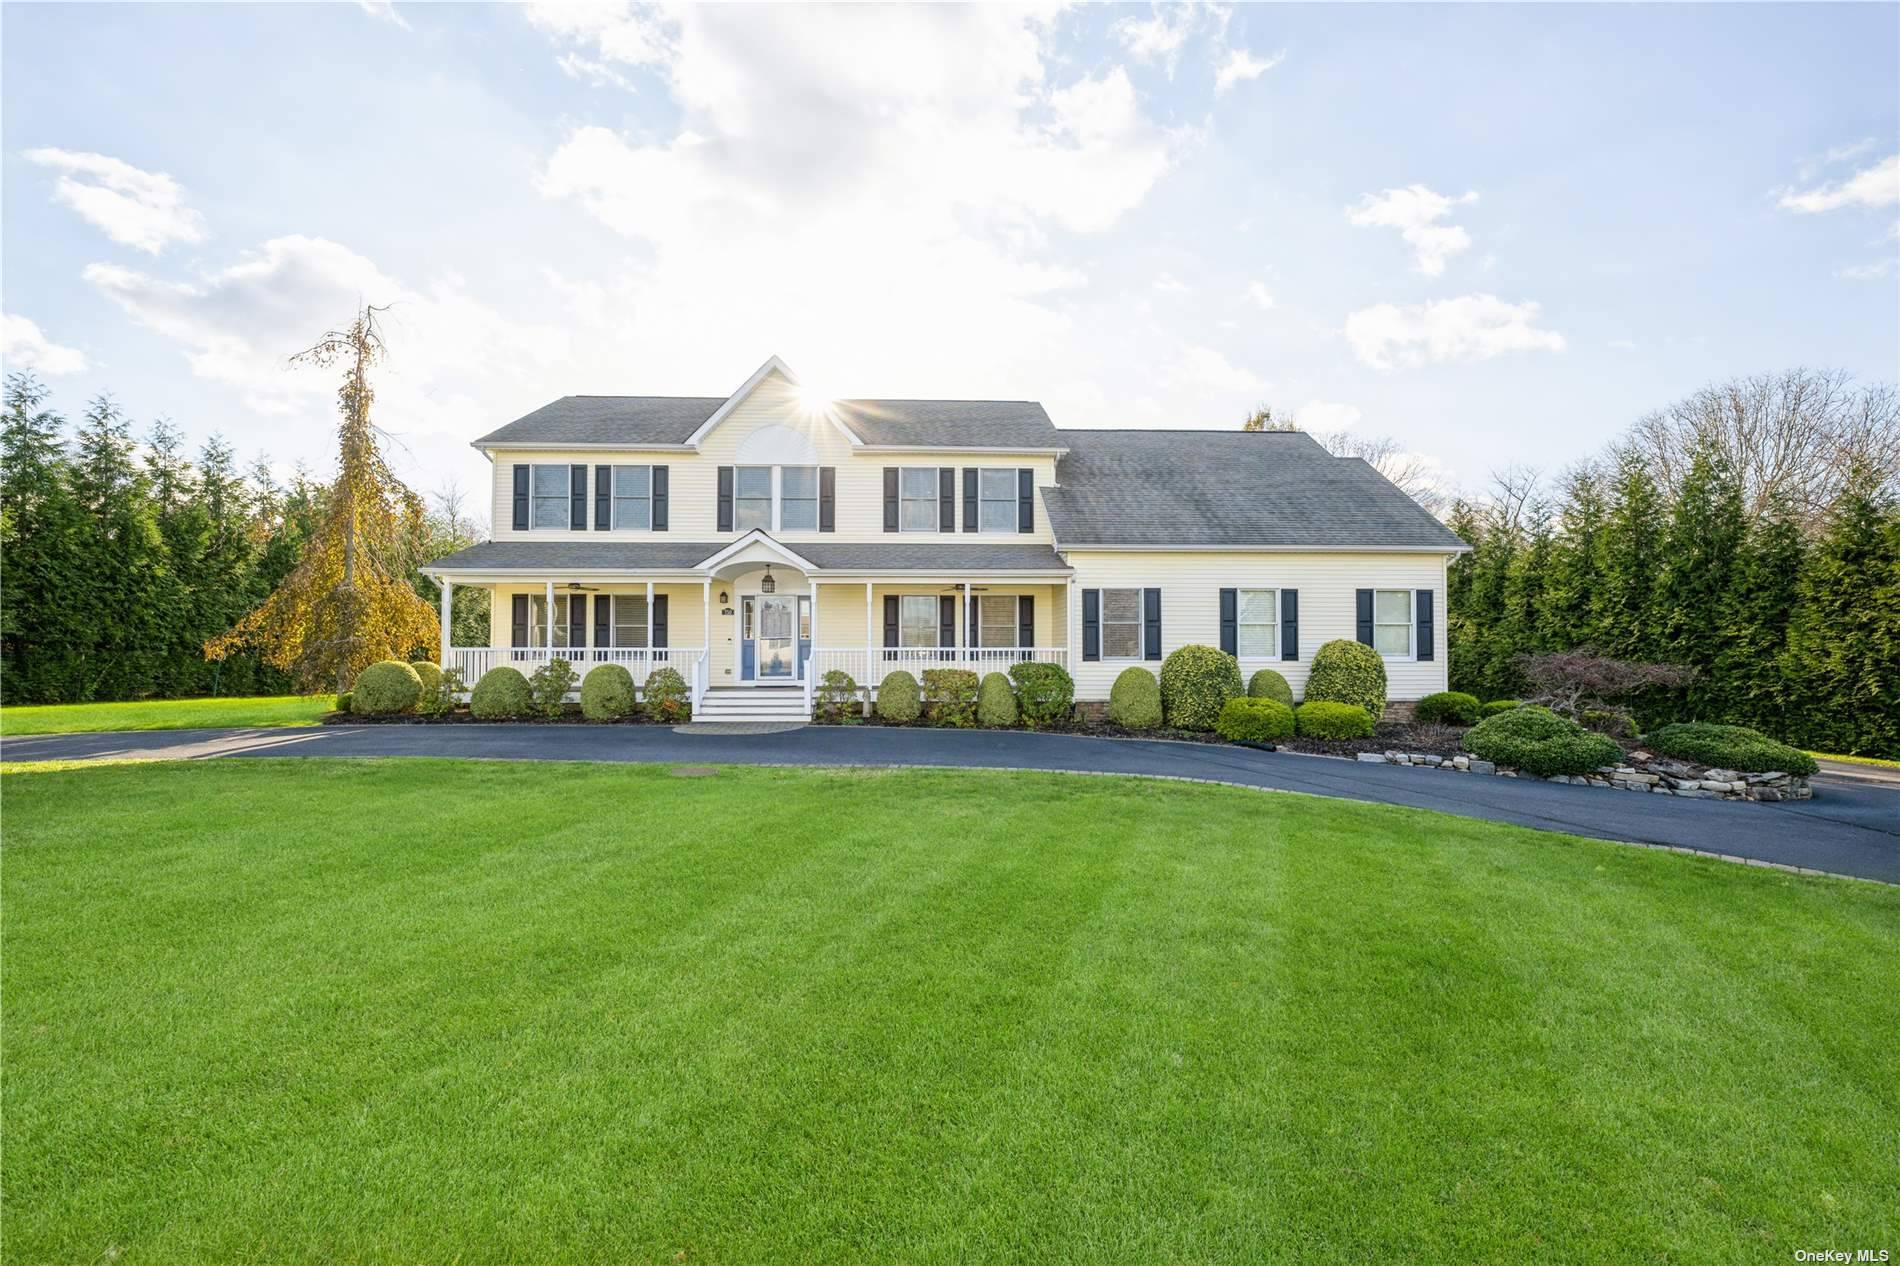 This Magnificent Colonial Style Fully Renovated Home Is The Ultimate City Escape !